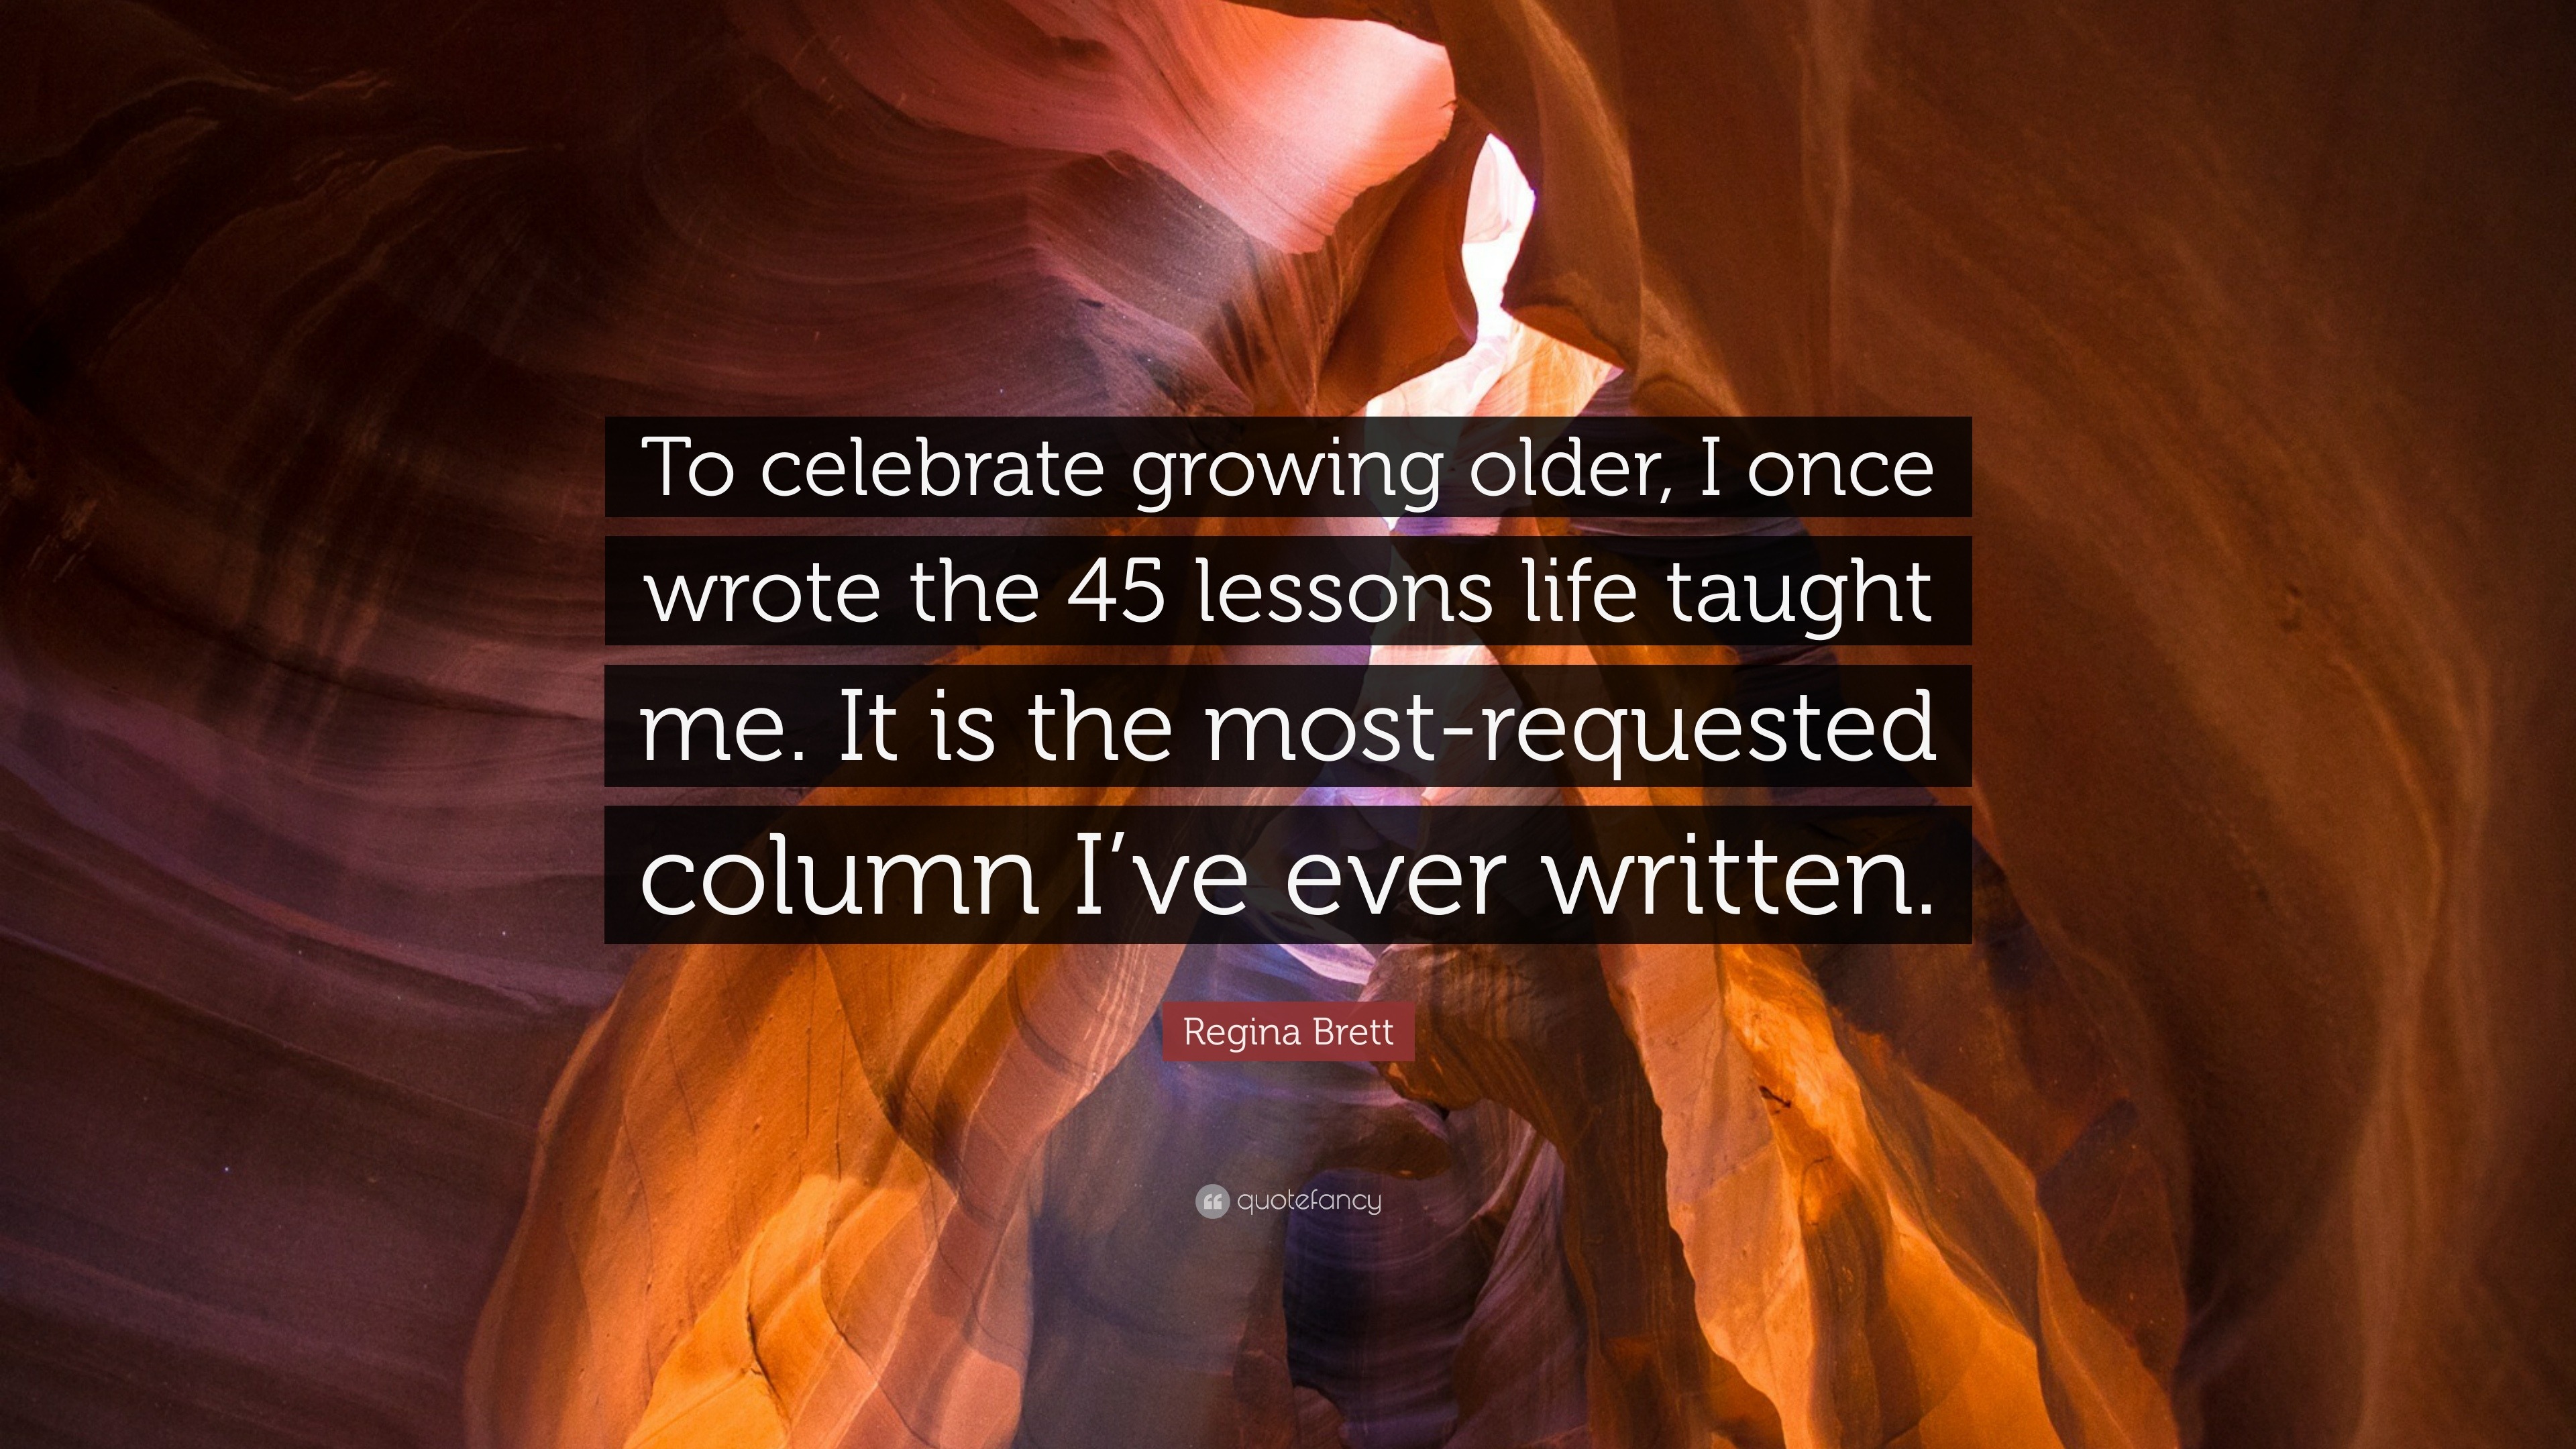 Regina Brett Quote “To celebrate growing older I once wrote the 45 lessons